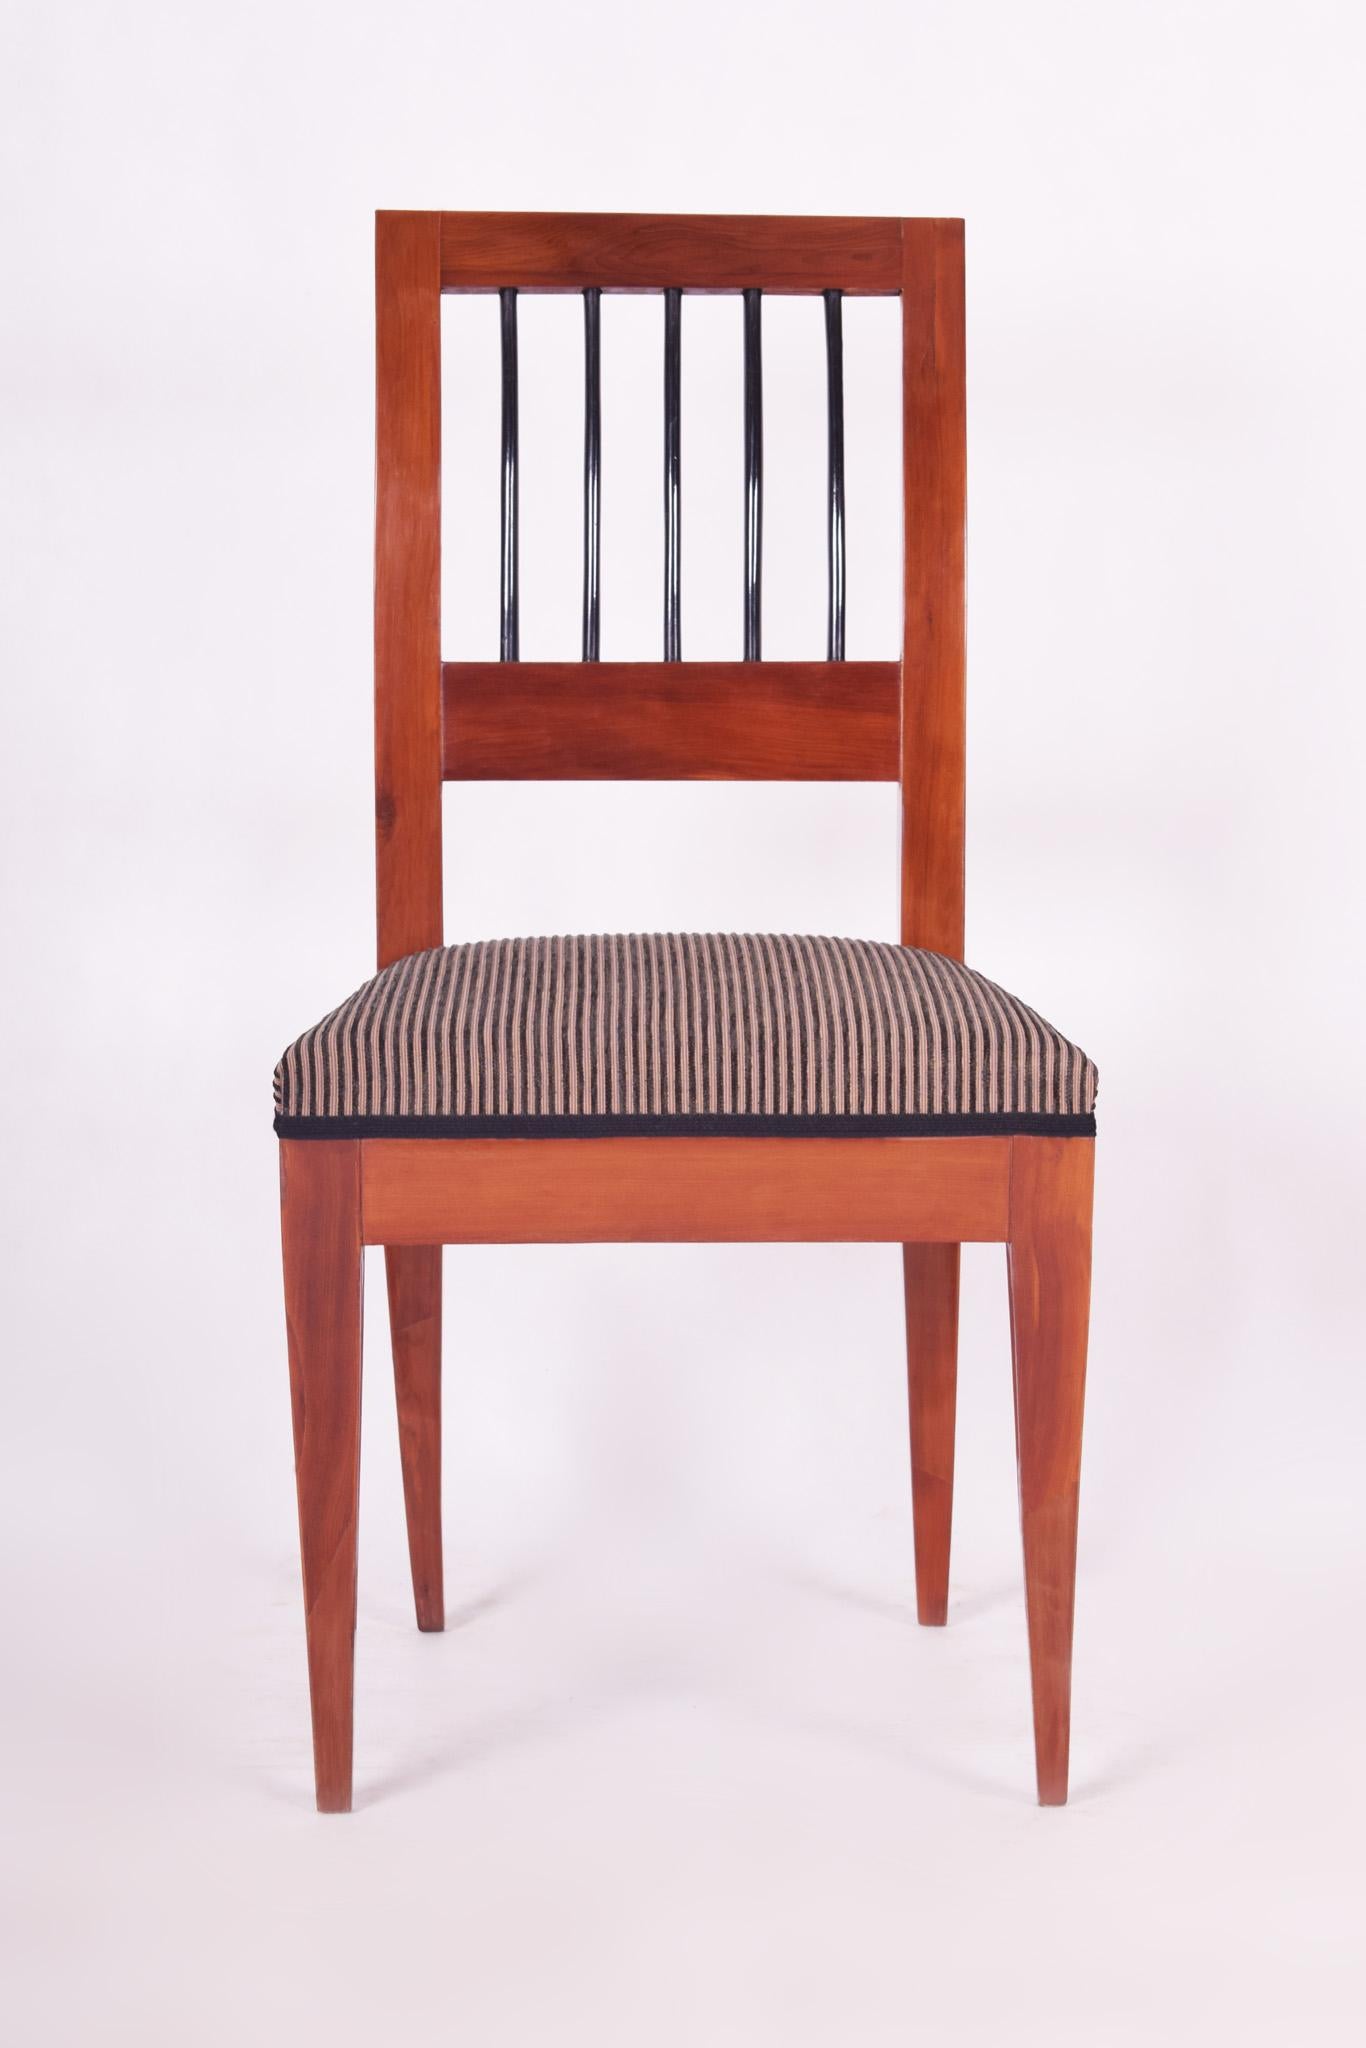 19th Century Biedermeier Side Chair Made in 1820s Austria, Restored Yew For Sale